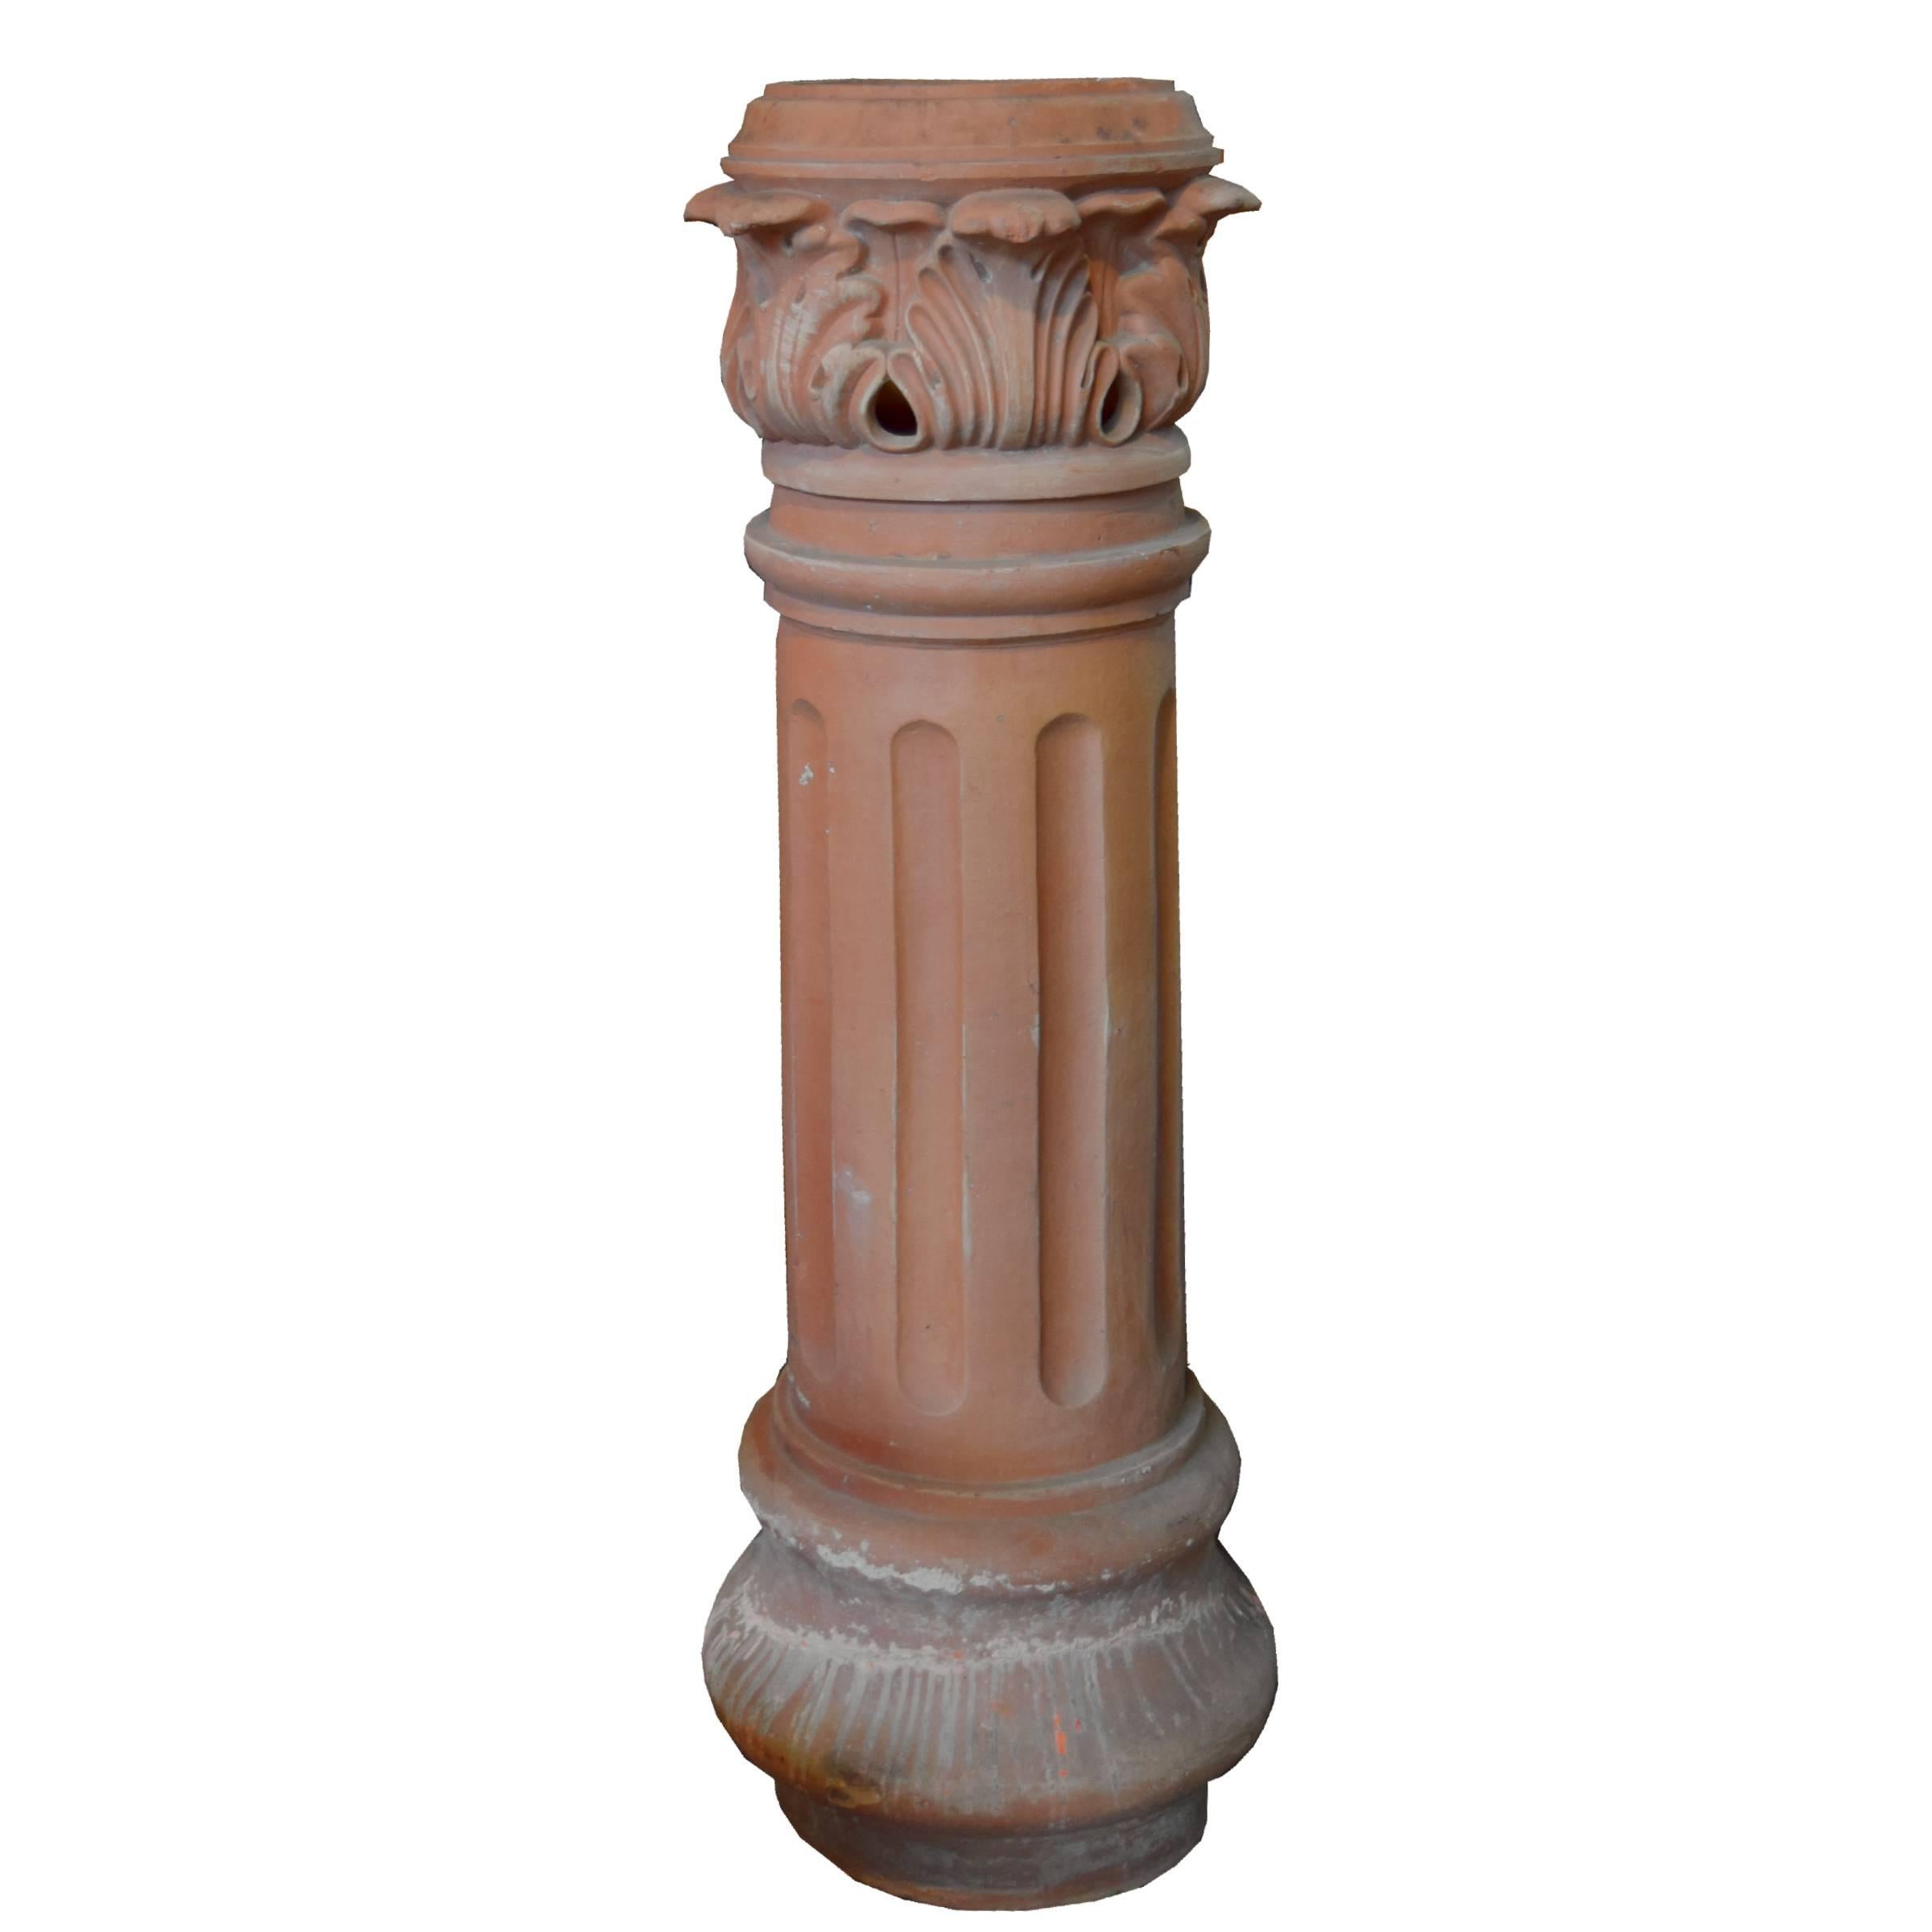 A great French terra cotta fluted chimney pot with acanthus leaf details, 19th century.